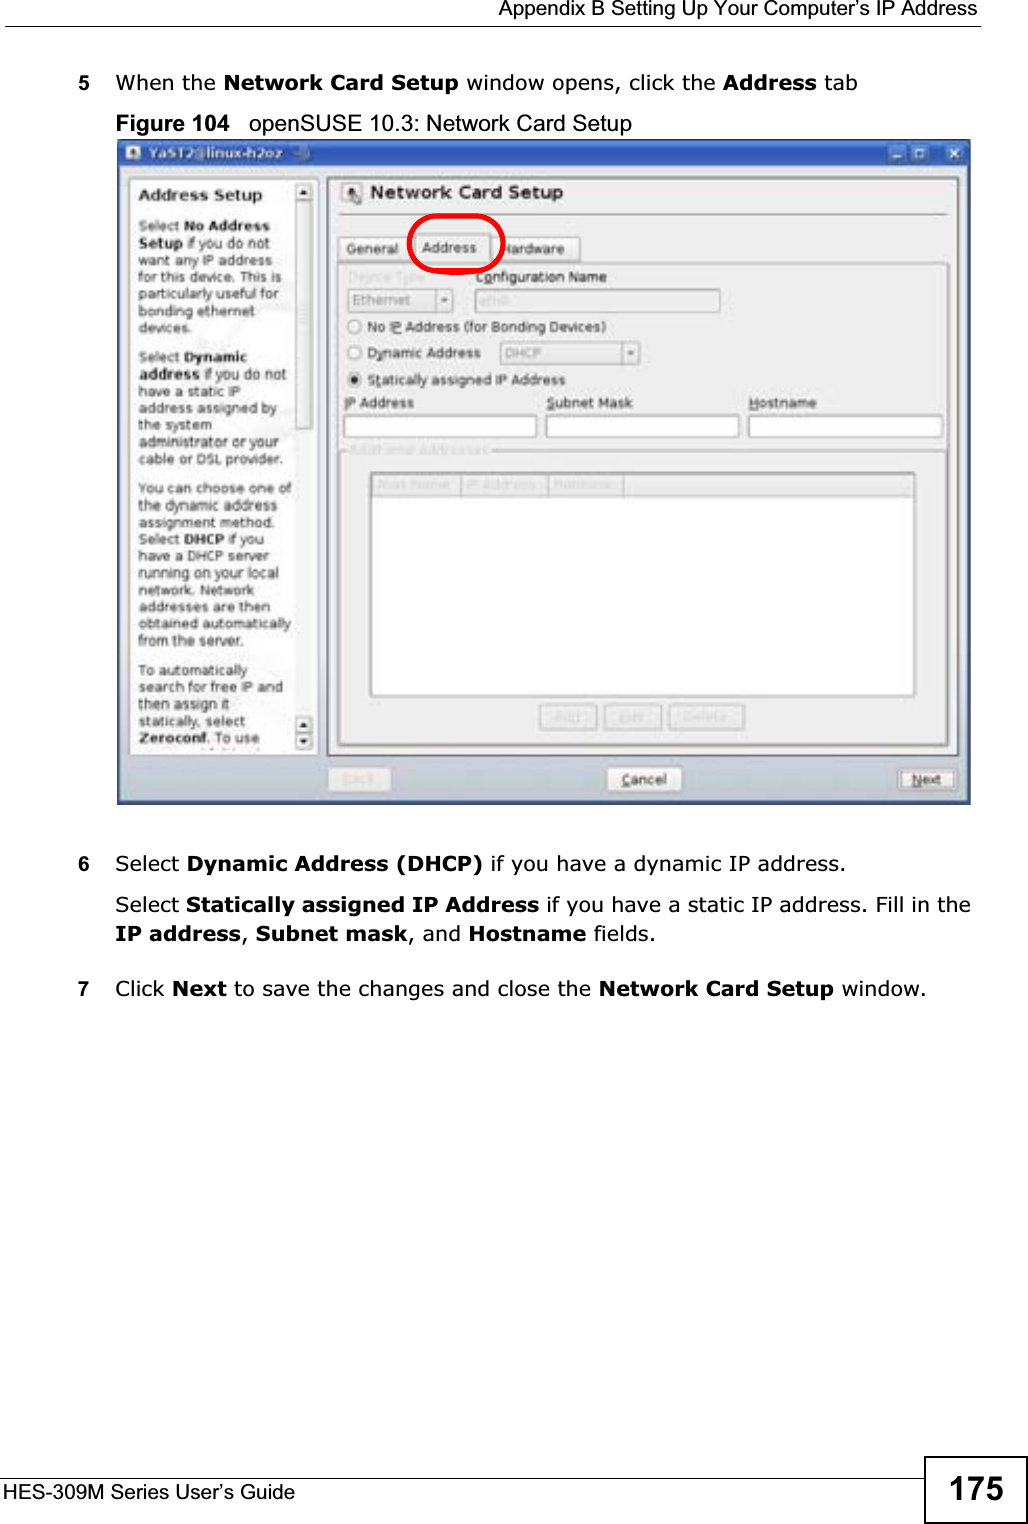  Appendix B Setting Up Your Computer’s IP AddressHES-309M Series User’s Guide 1755When the Network Card Setup window opens, click the Address tabFigure 104   openSUSE 10.3: Network Card Setup6Select Dynamic Address (DHCP) if you have a dynamic IP address.Select Statically assigned IP Address if you have a static IP address. Fill in the IP address,Subnet mask, and Hostname fields.7Click Next to save the changes and close the Network Card Setup window. 